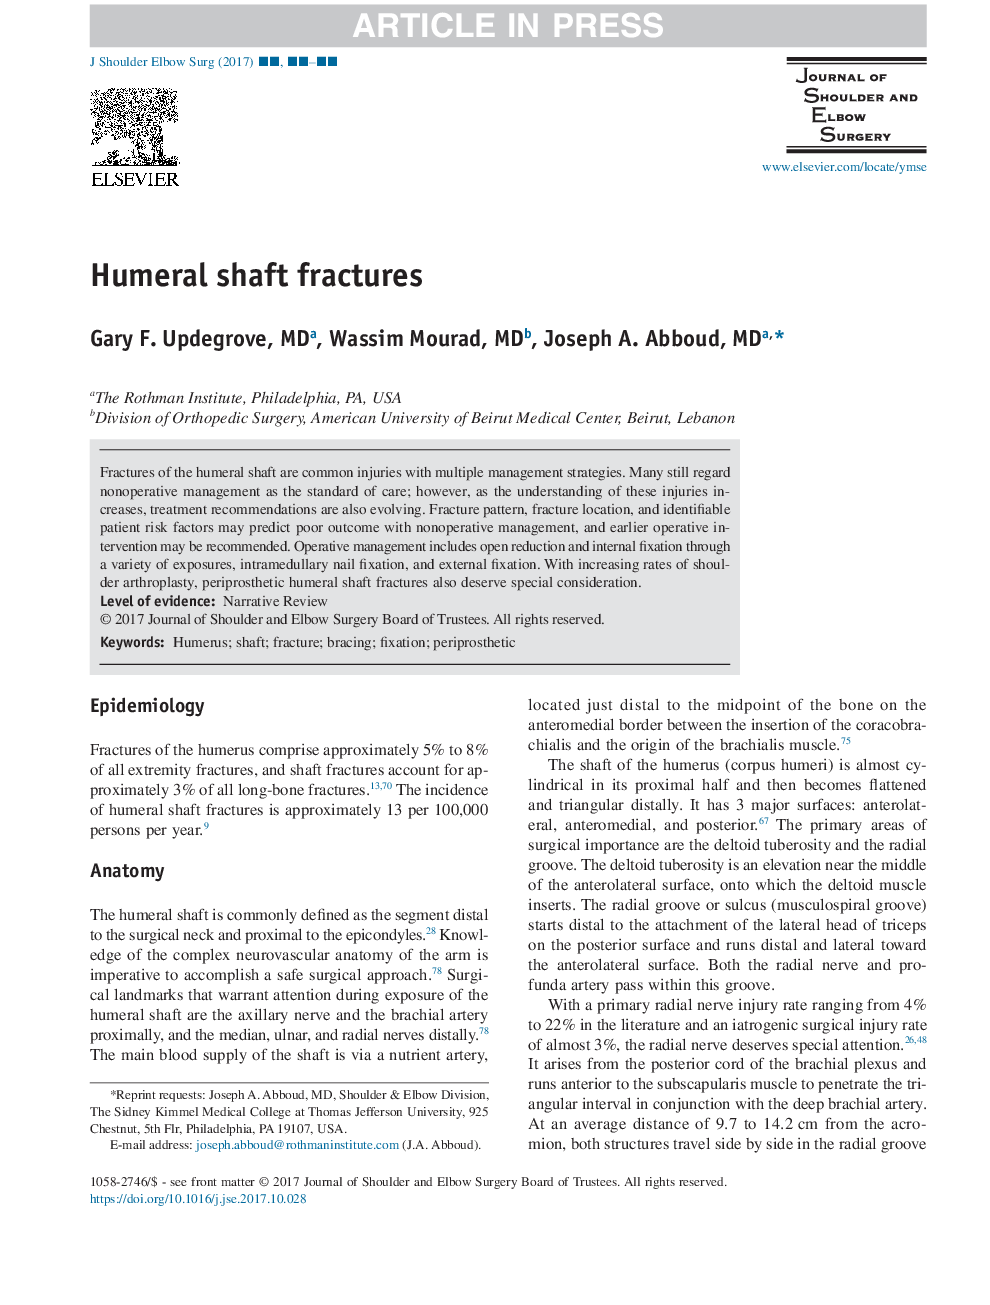 Humeral shaft fractures